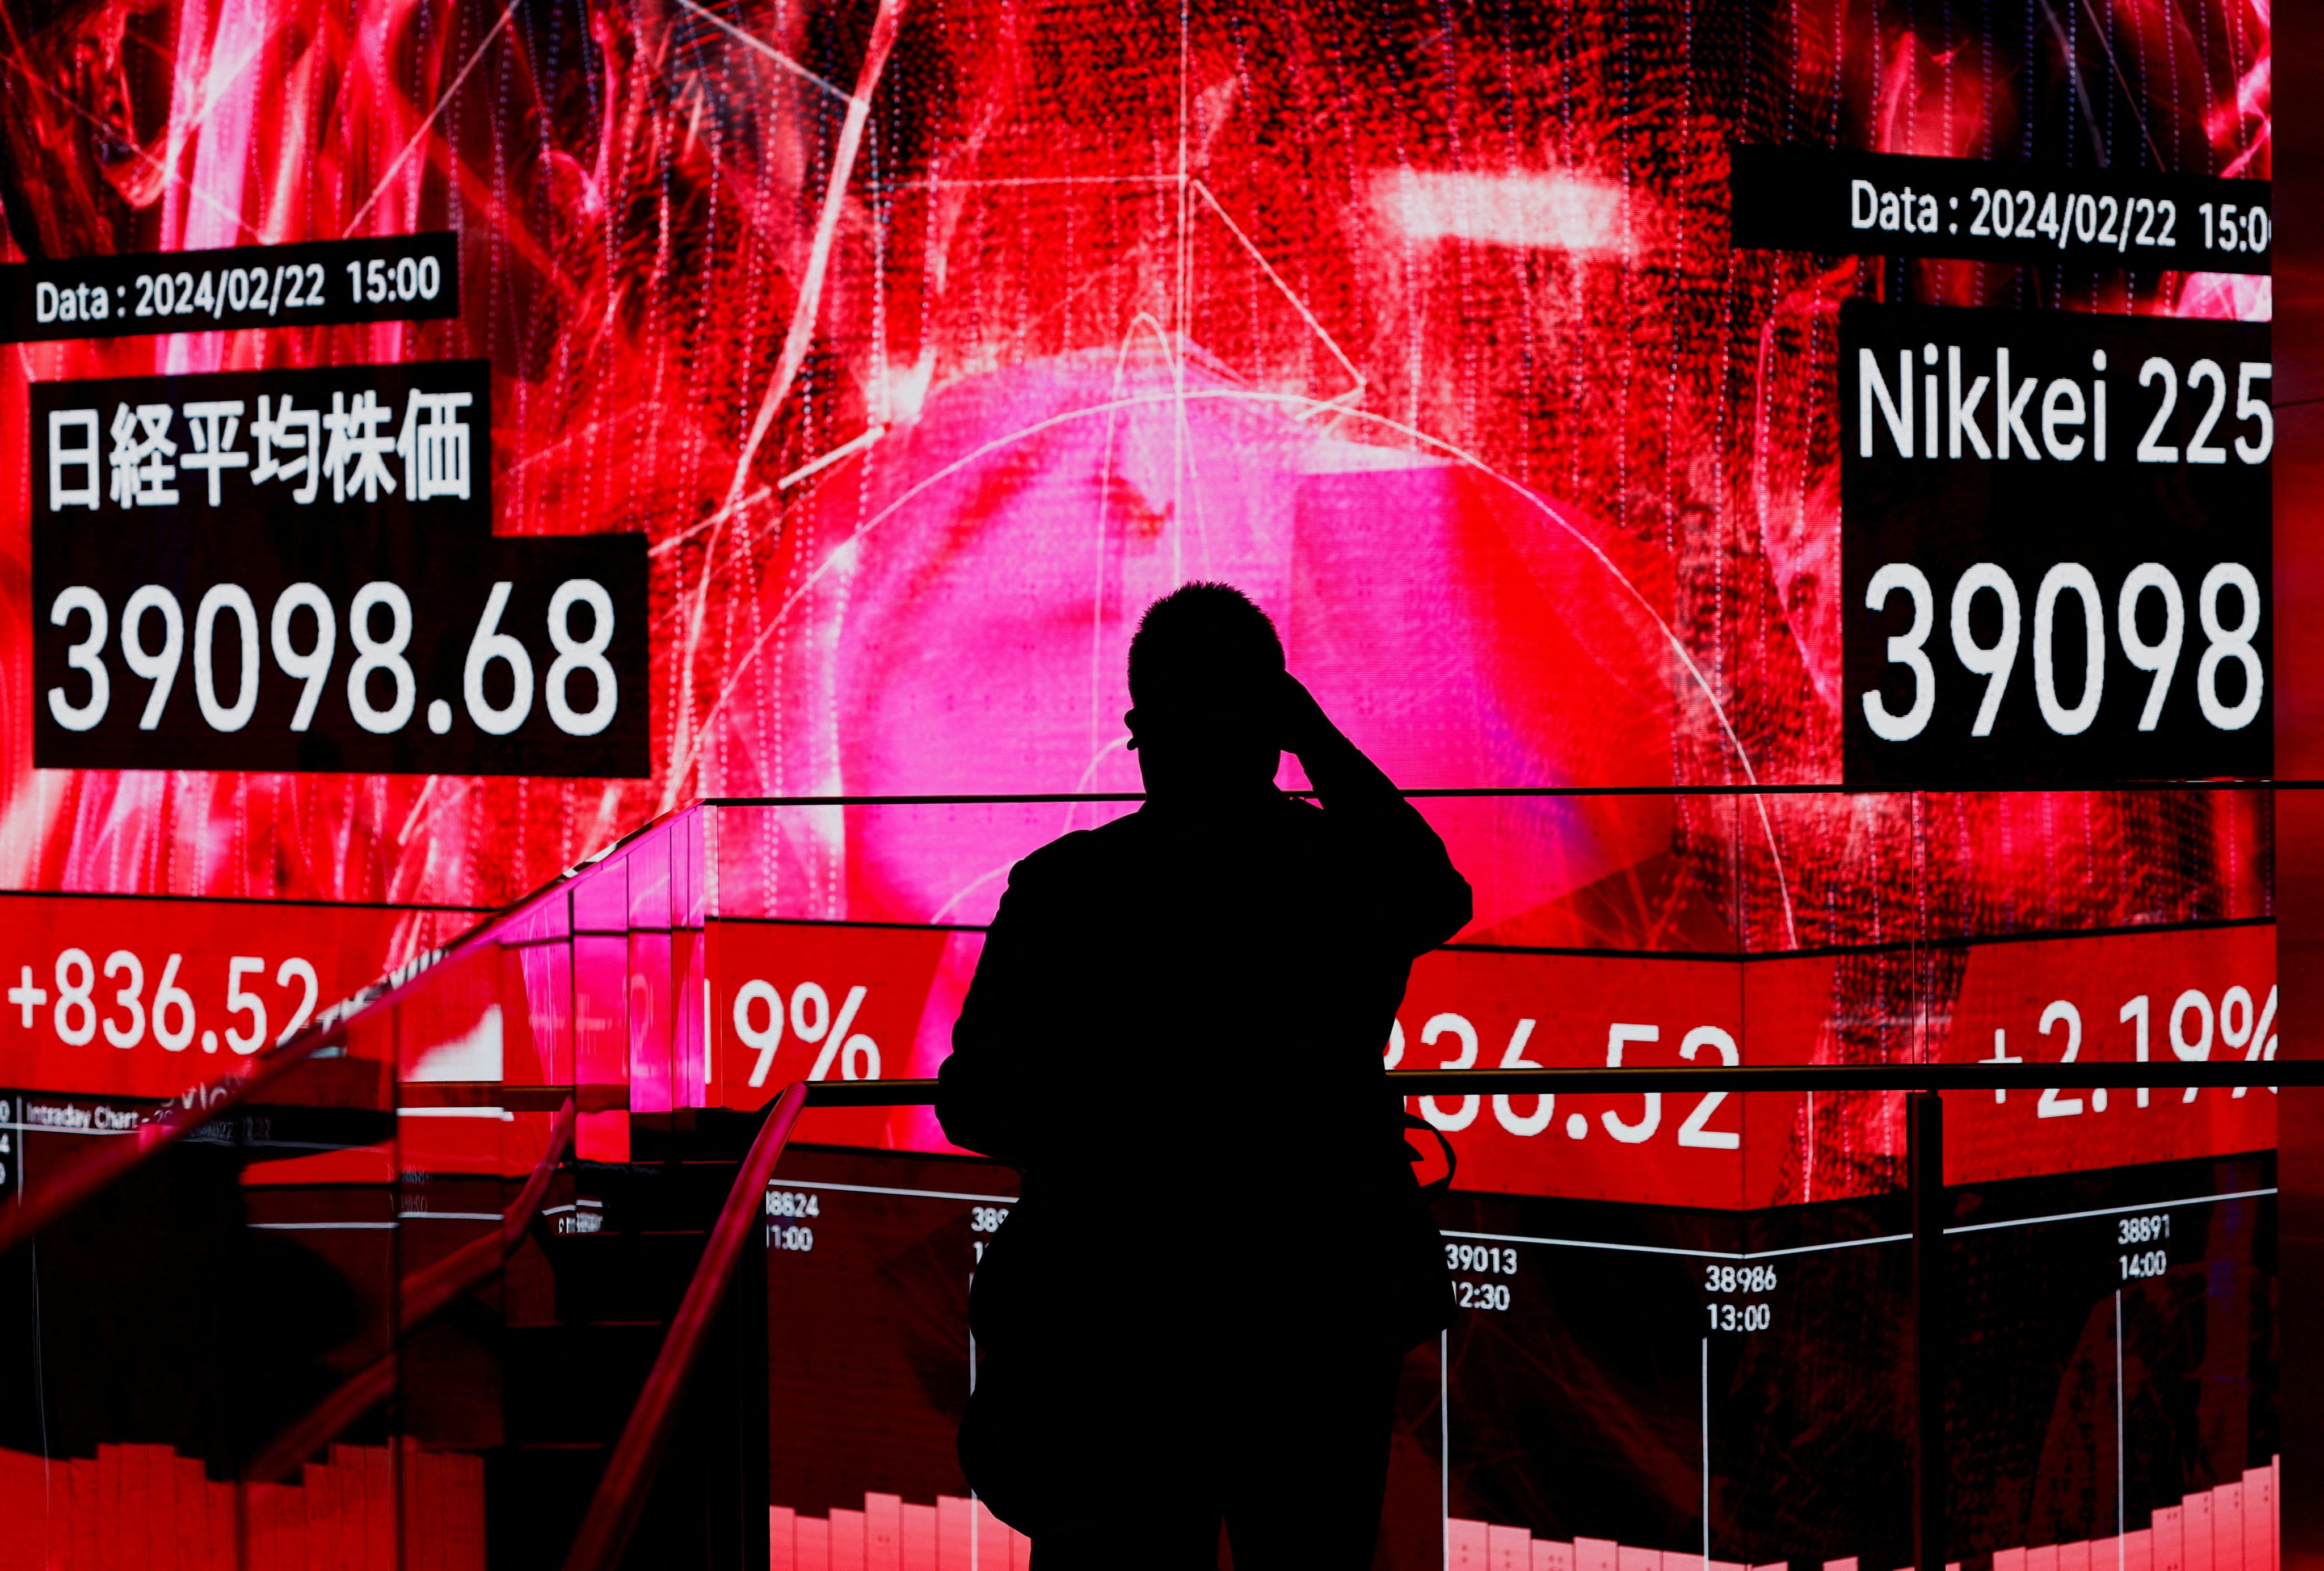 A visitor takes photos of an electronic screen displaying Japan’s Nikkei share average, which surged past an all-time record high set in December 1989, inside a building in Tokyo on February 22. Photo: Reuters